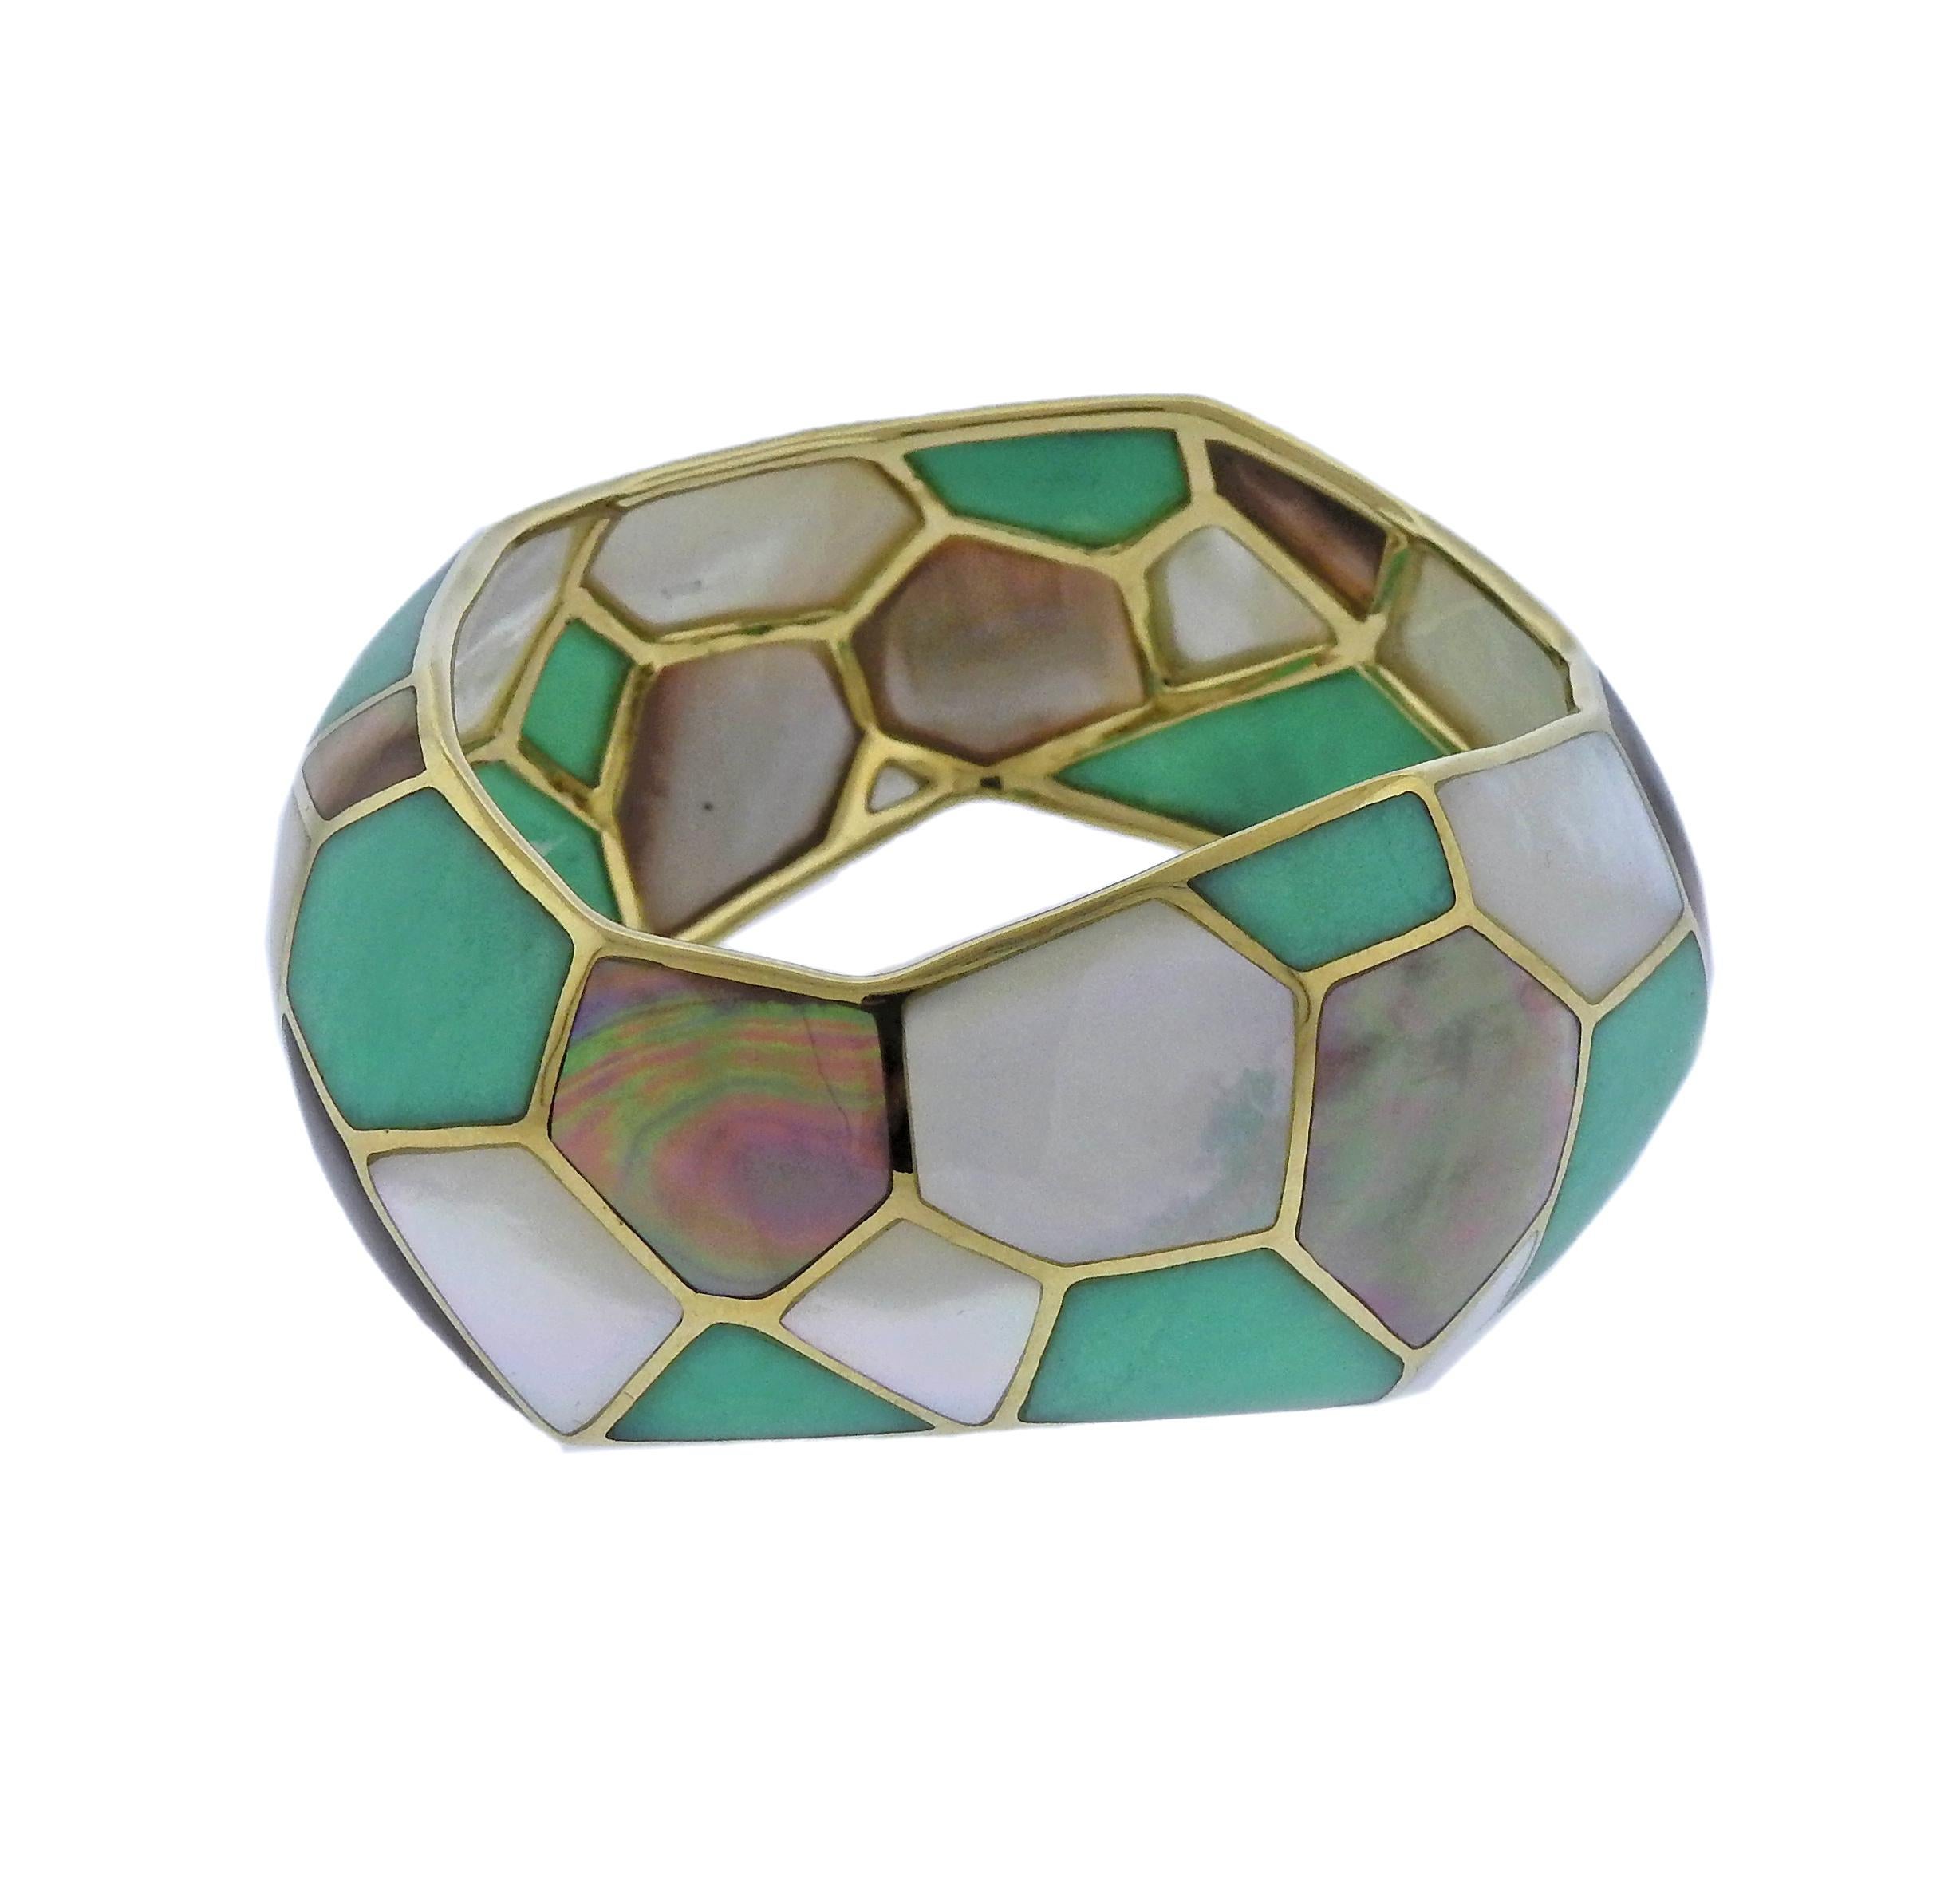 Large 18k gold bangle bracelet, crafted by Ippolita, set with chrysoprase and mother of pearl mosaic design. Bracelet will fit approx. 7 